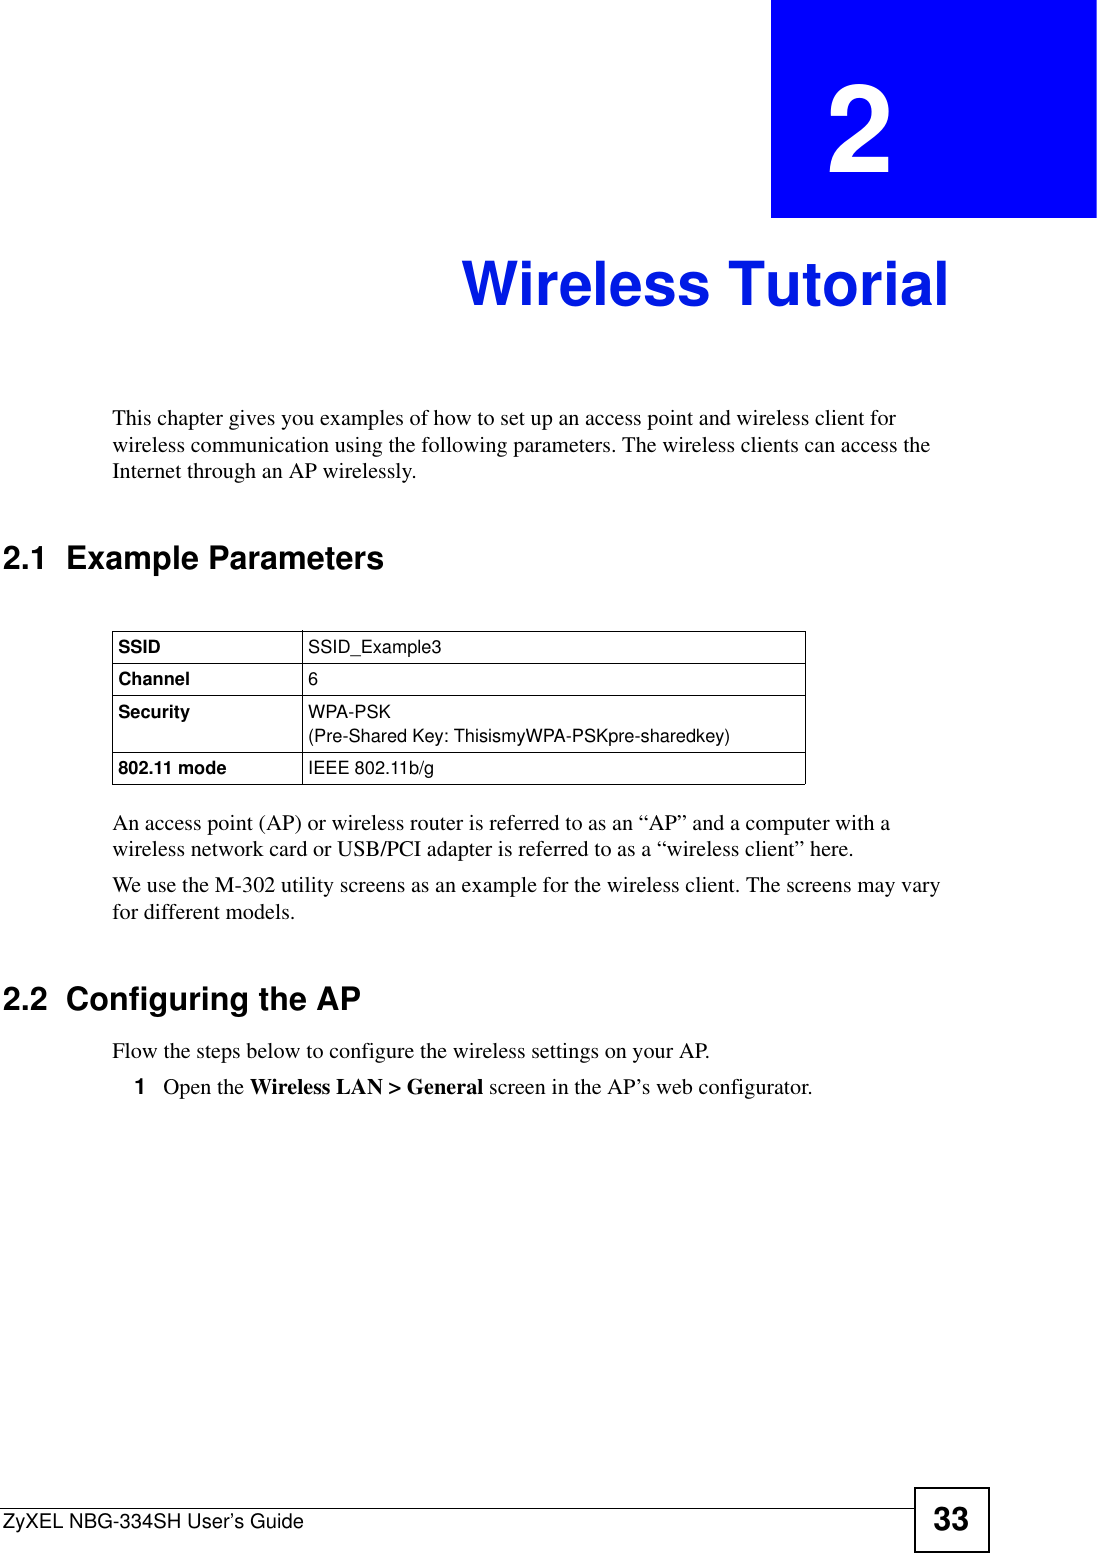 ZyXEL NBG-334SH User’s Guide 33CHAPTER  2 Wireless TutorialThis chapter gives you examples of how to set up an access point and wireless client for wireless communication using the following parameters. The wireless clients can access the Internet through an AP wirelessly.2.1  Example ParametersAn access point (AP) or wireless router is referred to as an “AP” and a computer with a wireless network card or USB/PCI adapter is referred to as a “wireless client” here.We use the M-302 utility screens as an example for the wireless client. The screens may vary for different models.2.2  Configuring the APFlow the steps below to configure the wireless settings on your AP.1Open the Wireless LAN &gt; General screen in the AP’s web configurator.SSID SSID_Example3Channel 6Security  WPA-PSK(Pre-Shared Key: ThisismyWPA-PSKpre-sharedkey)802.11 mode IEEE 802.11b/g